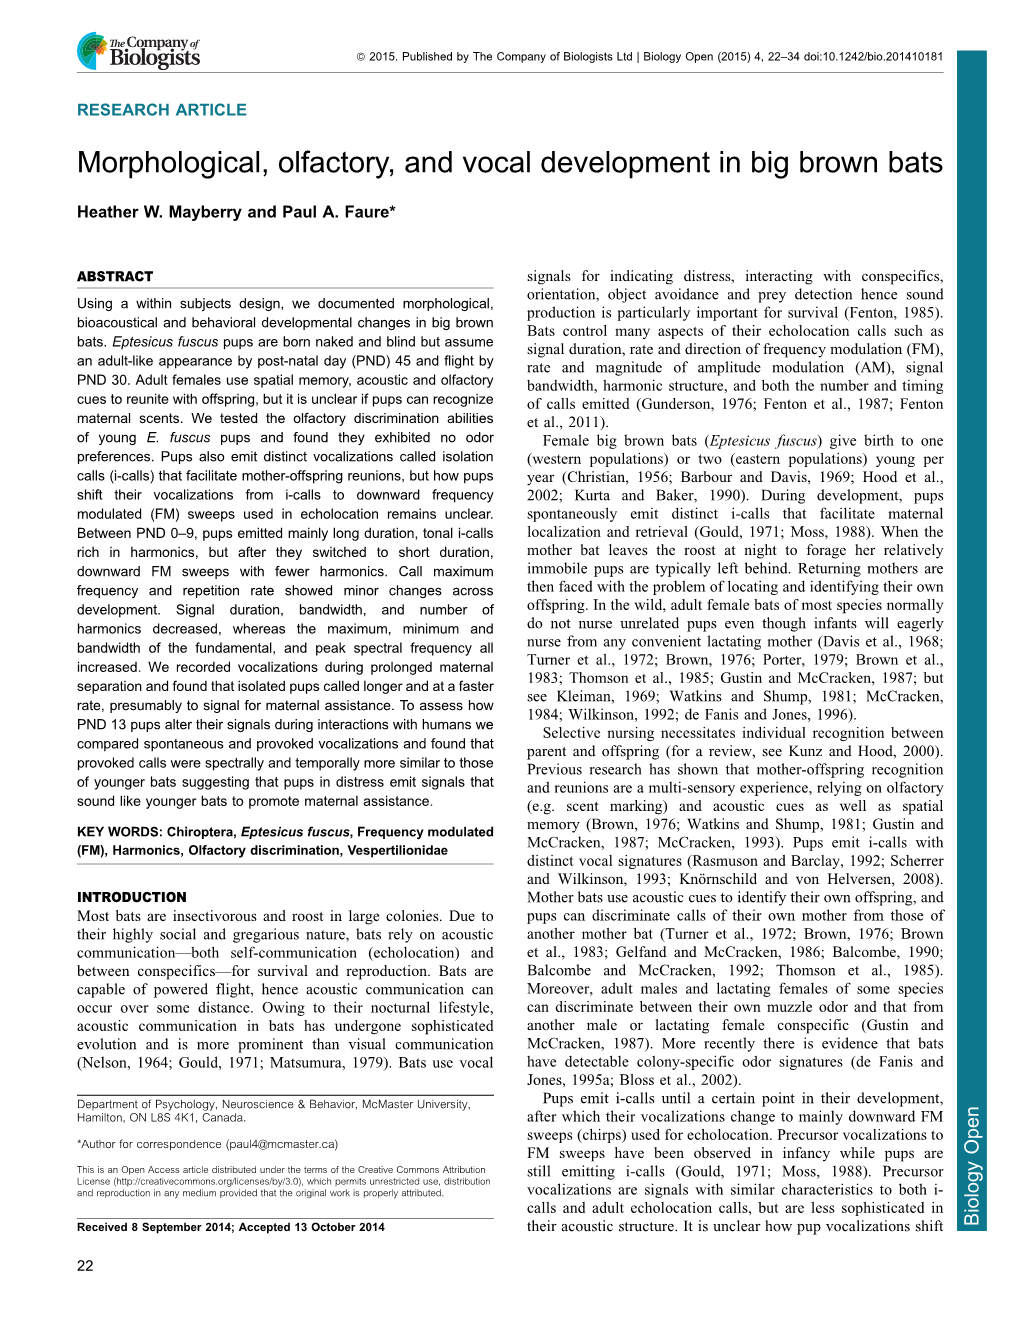 Morphological, Olfactory, and Vocal Development in Big Brown Bats